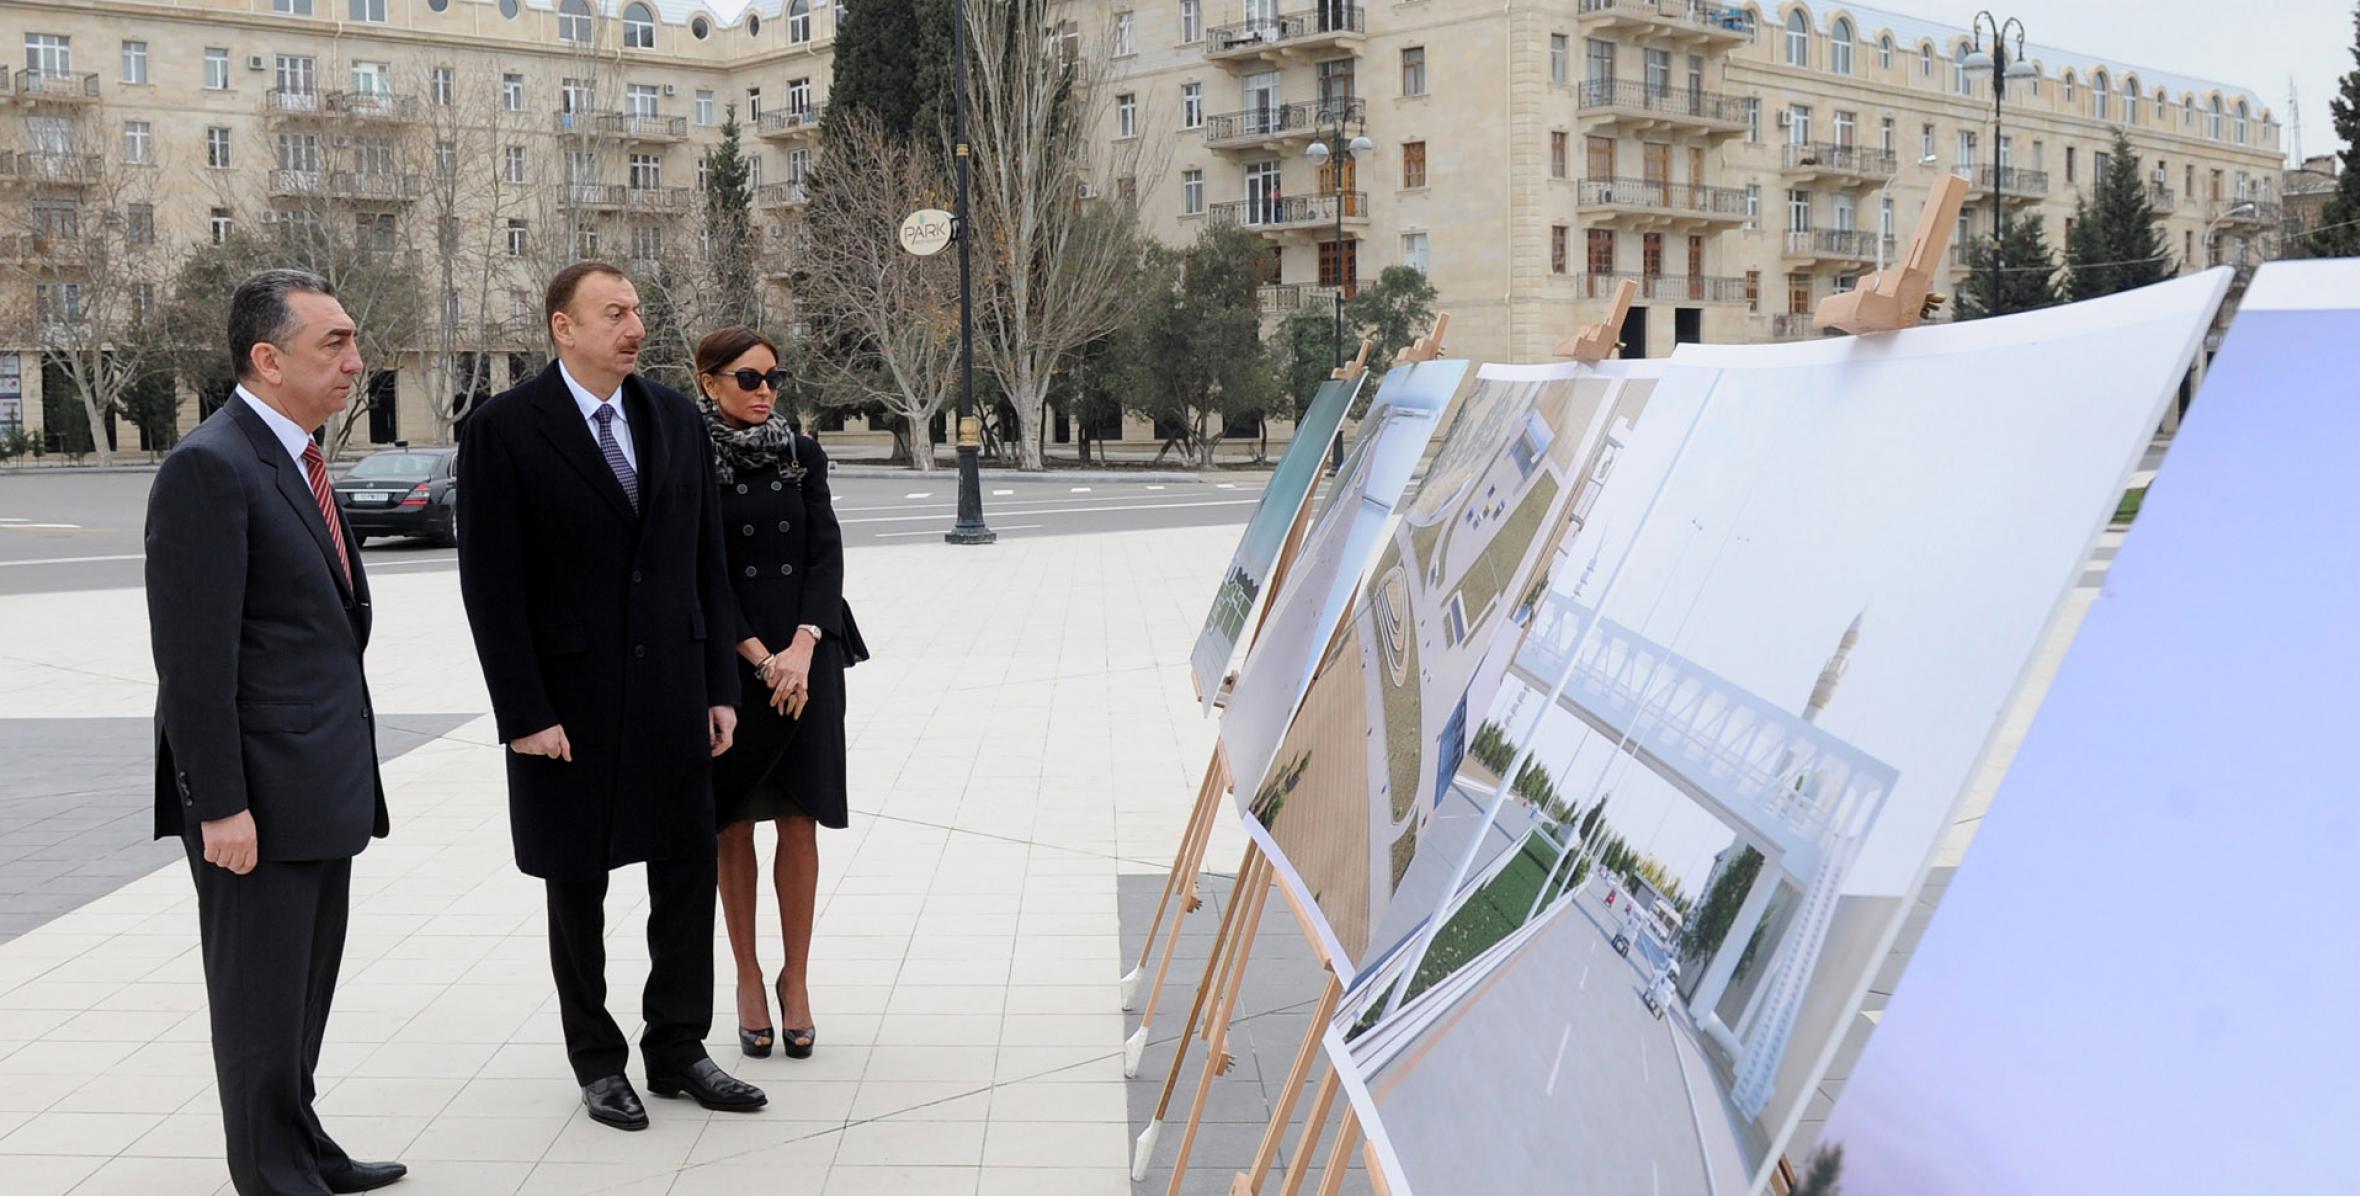 Ilham Aliyev reviewed progress of major overhaul at the Sumgayit seaside culture and recreation park